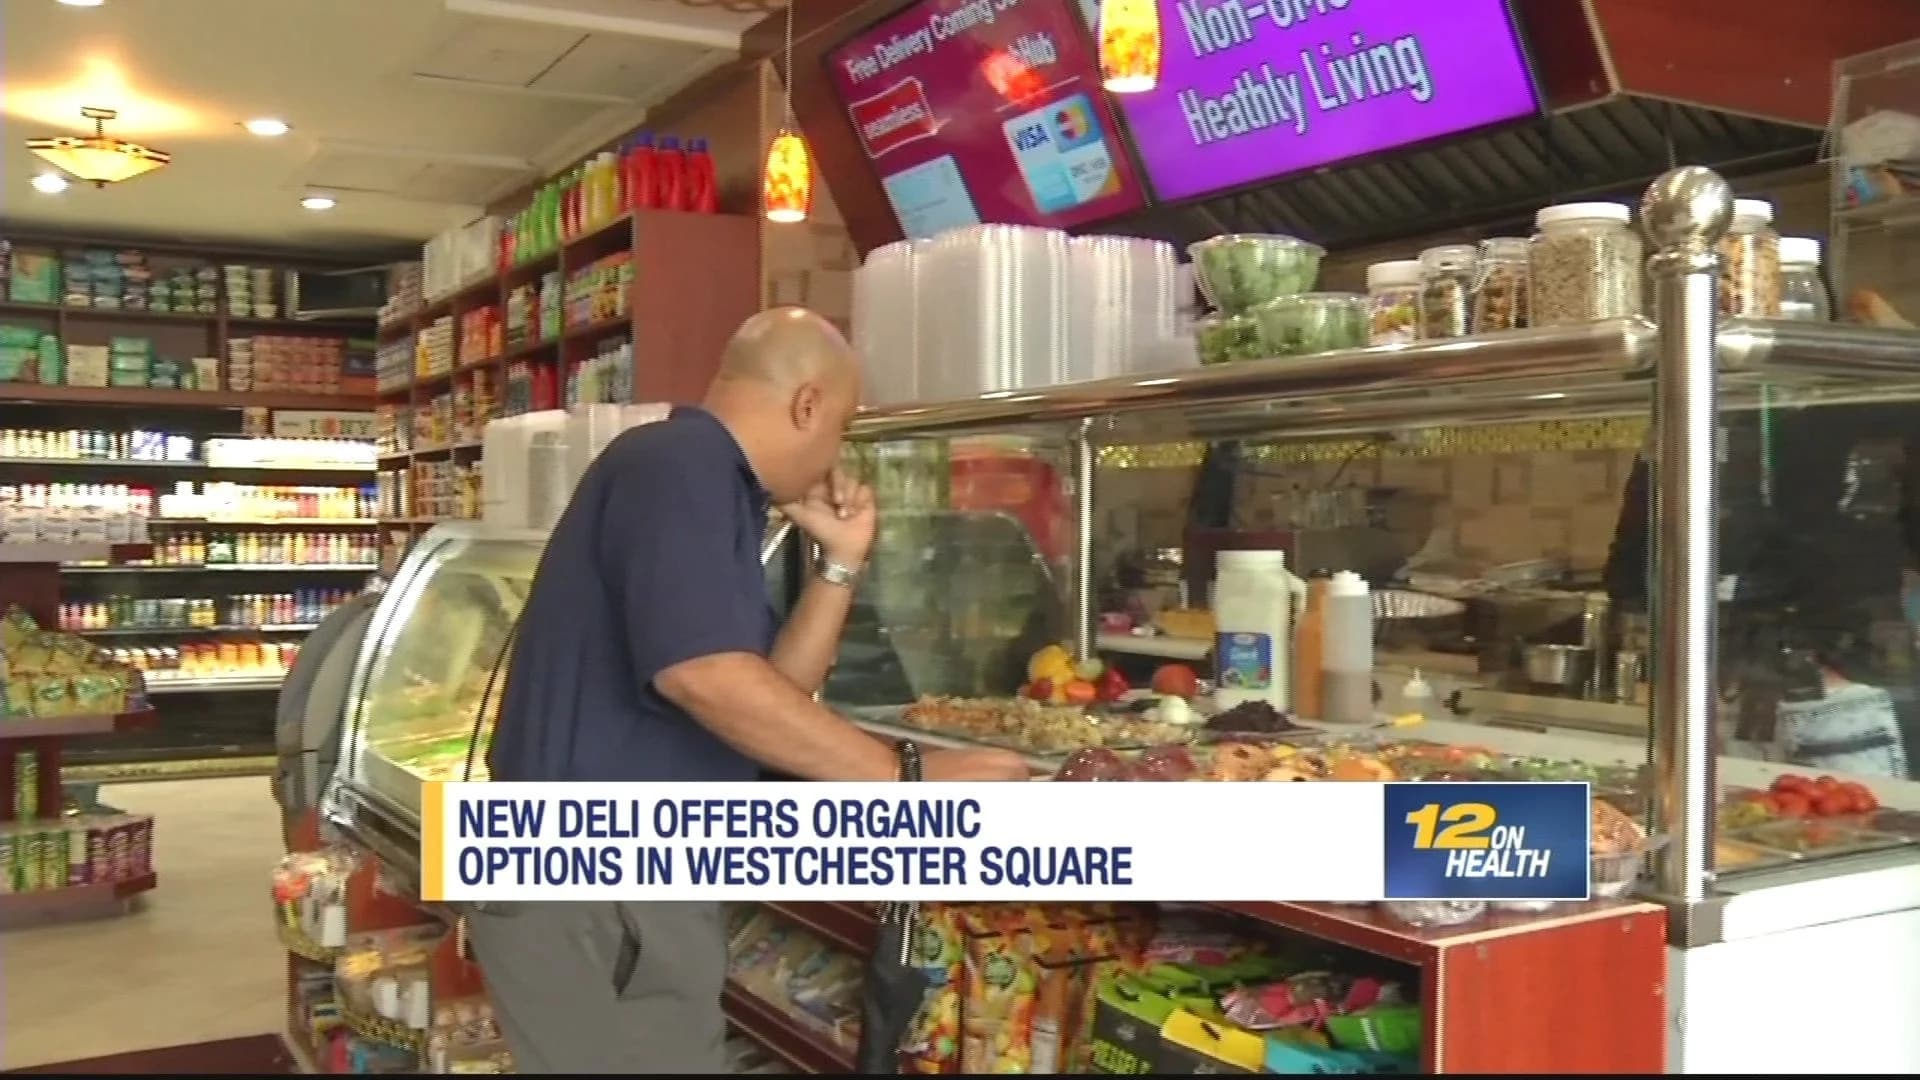 New deli offers organic options in Westchester Square